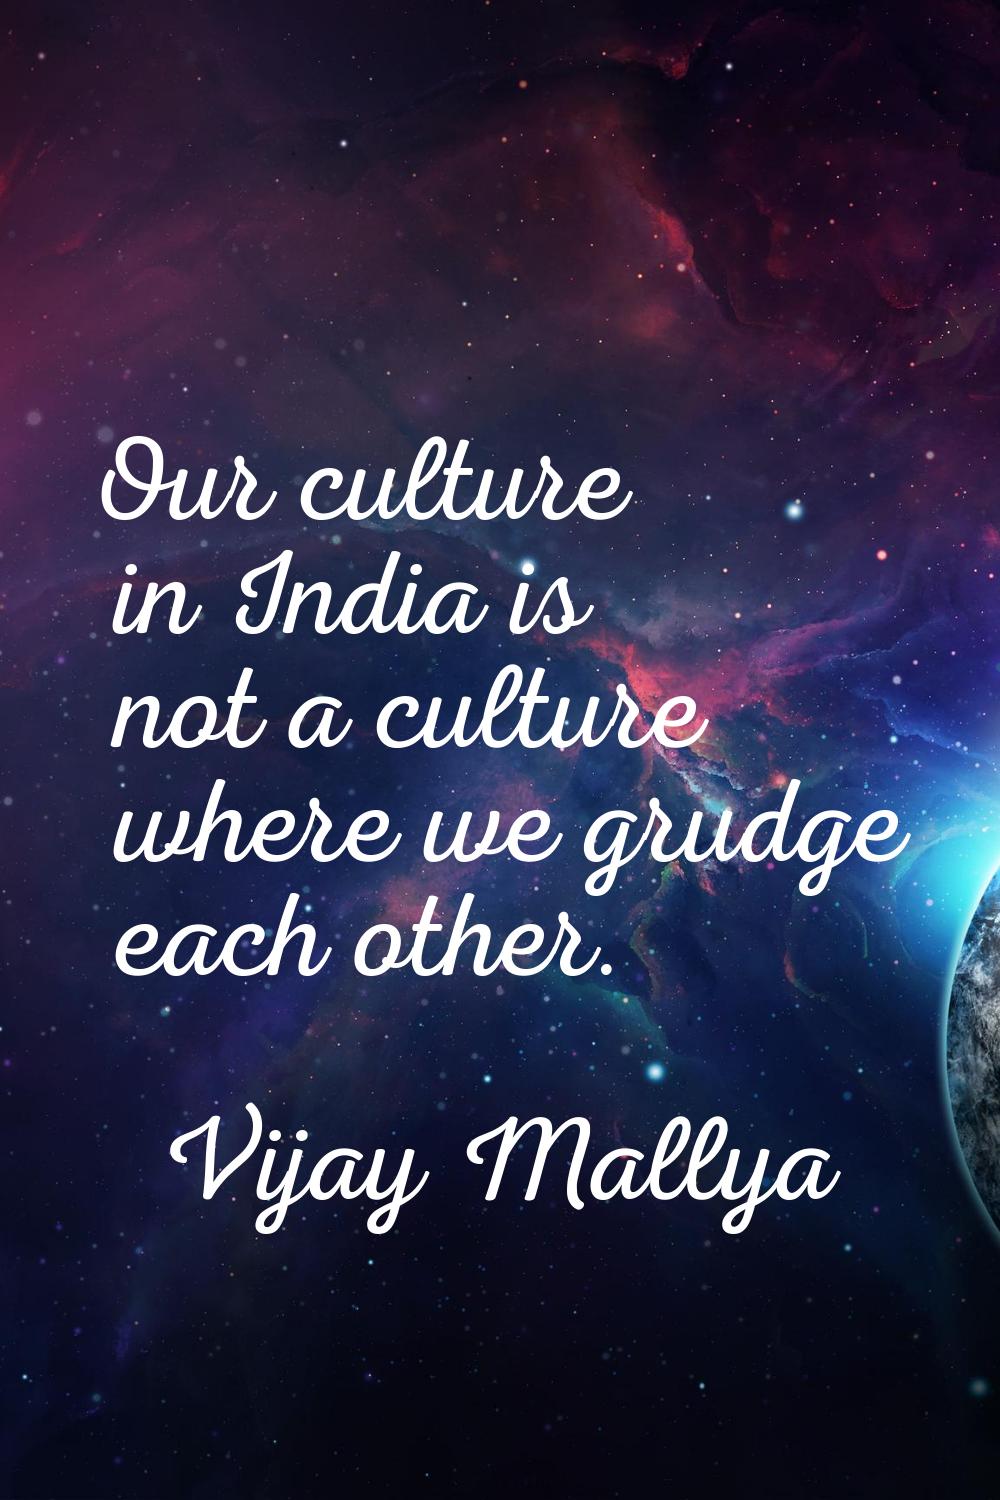 Our culture in India is not a culture where we grudge each other.